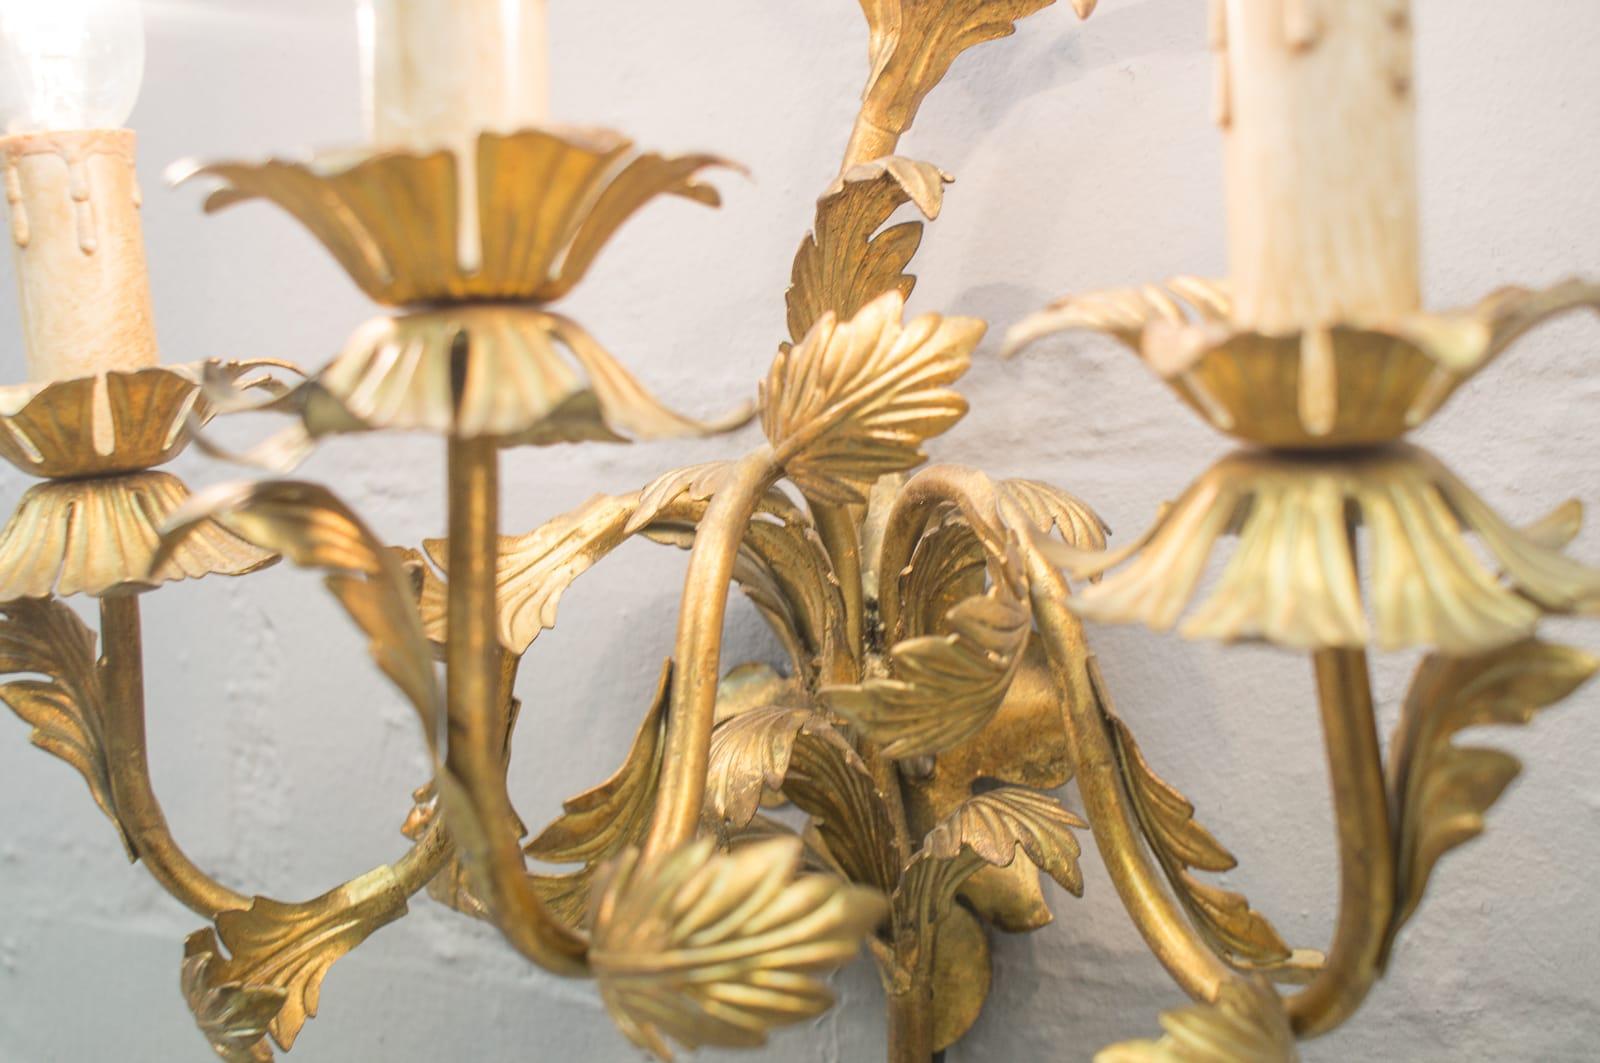 Pair of Vintage Hollywood Regency Massive Brass Wall Lights, Italy, 1960s For Sale 6